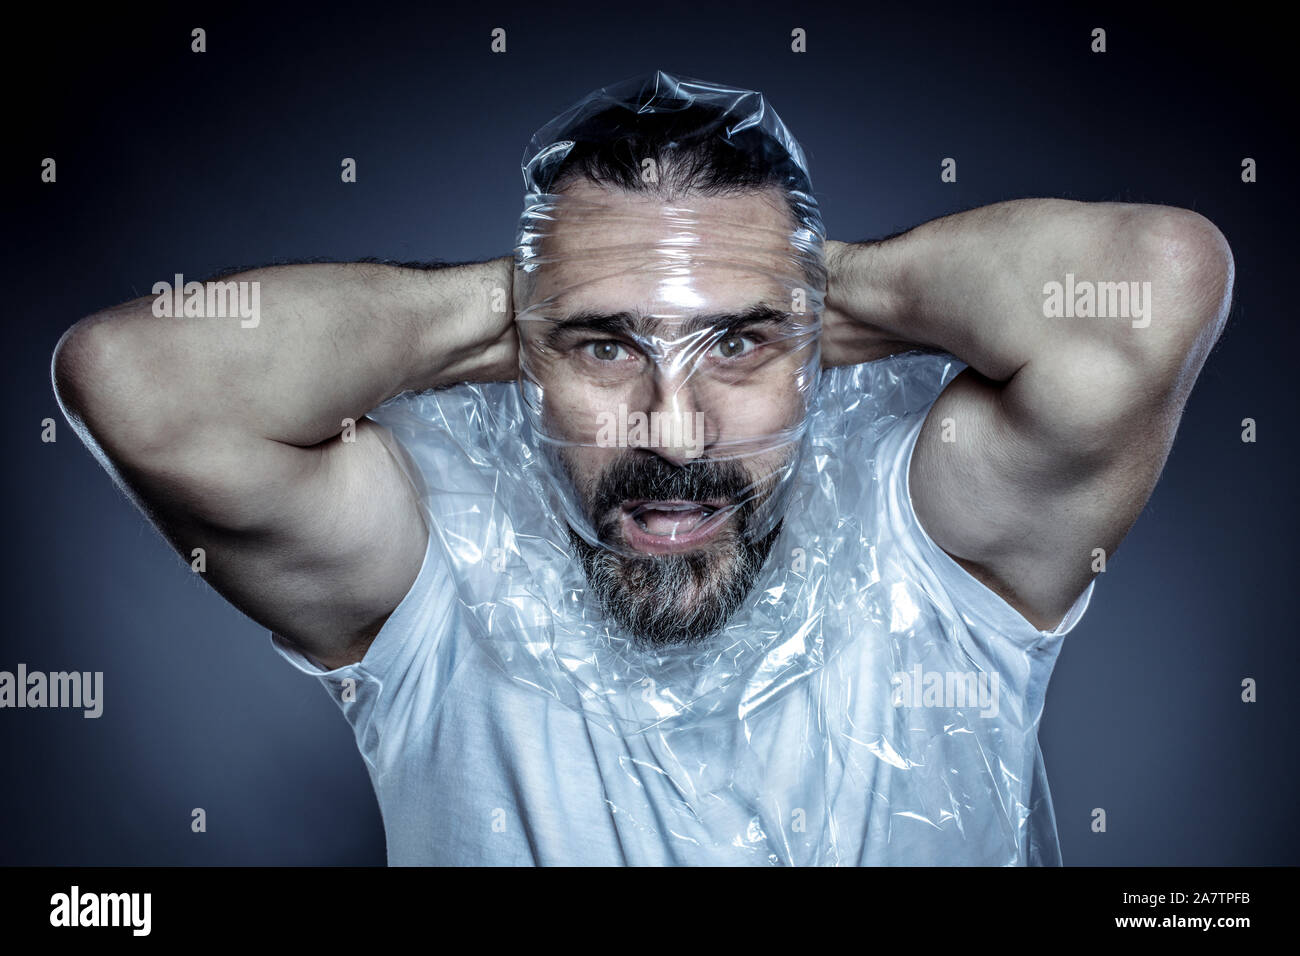 portrait of a man with a beard and his face wrapped in a plastic film. concept of toxicity of plastic materials and their excessive use in common life Stock Photo